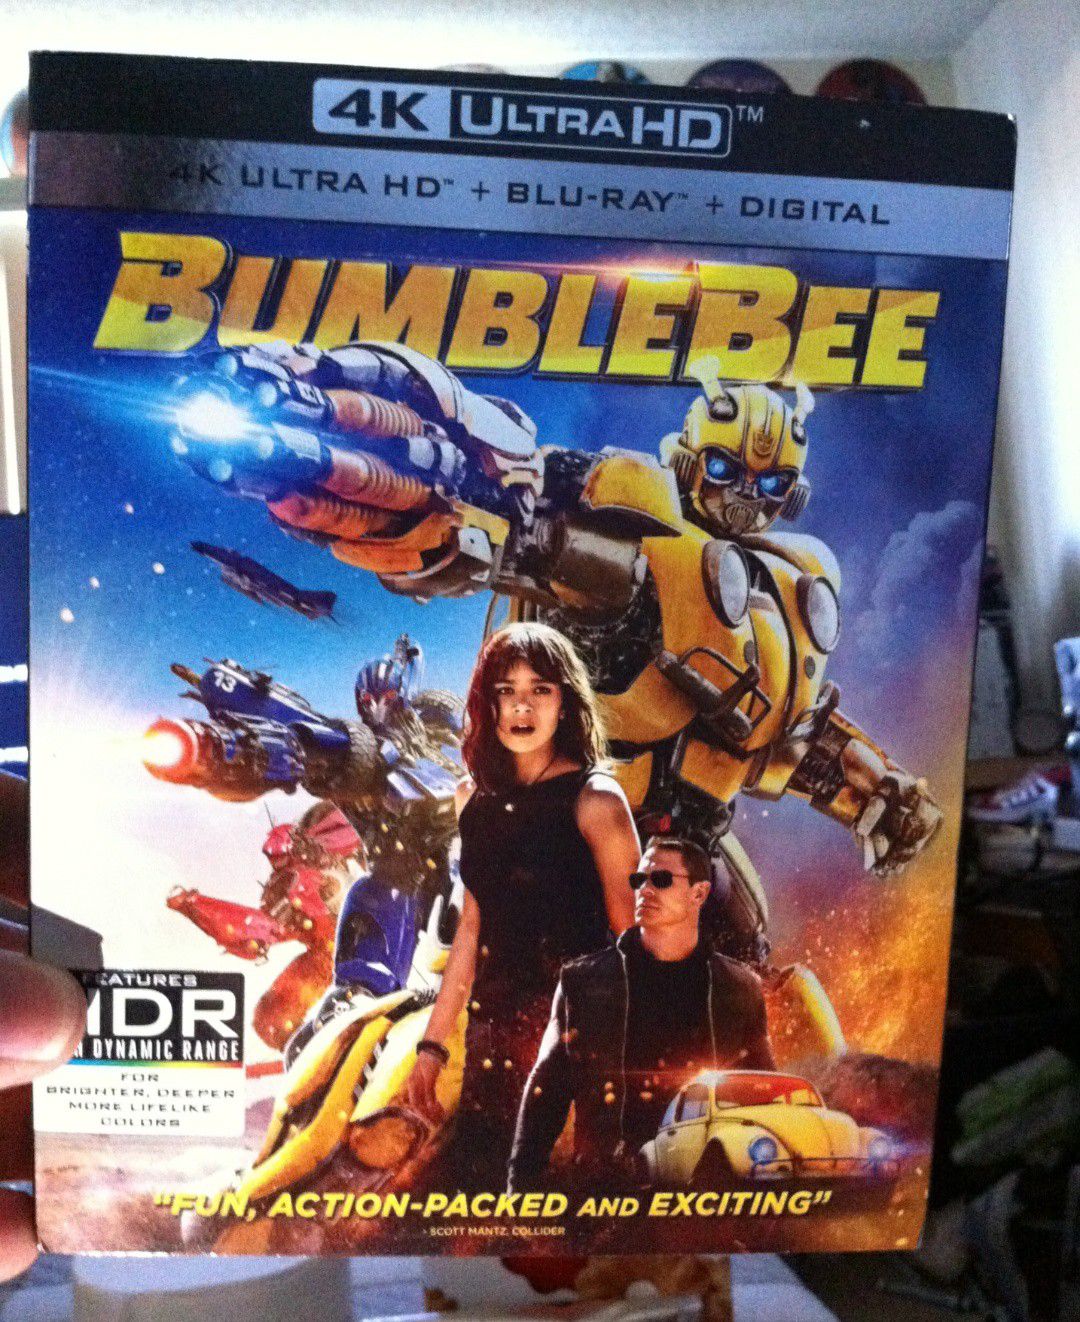 BUMBLEBEE 4K ULTRA HD BLU-RAY. JUST 4K MOVIE NEW With Slip Cover